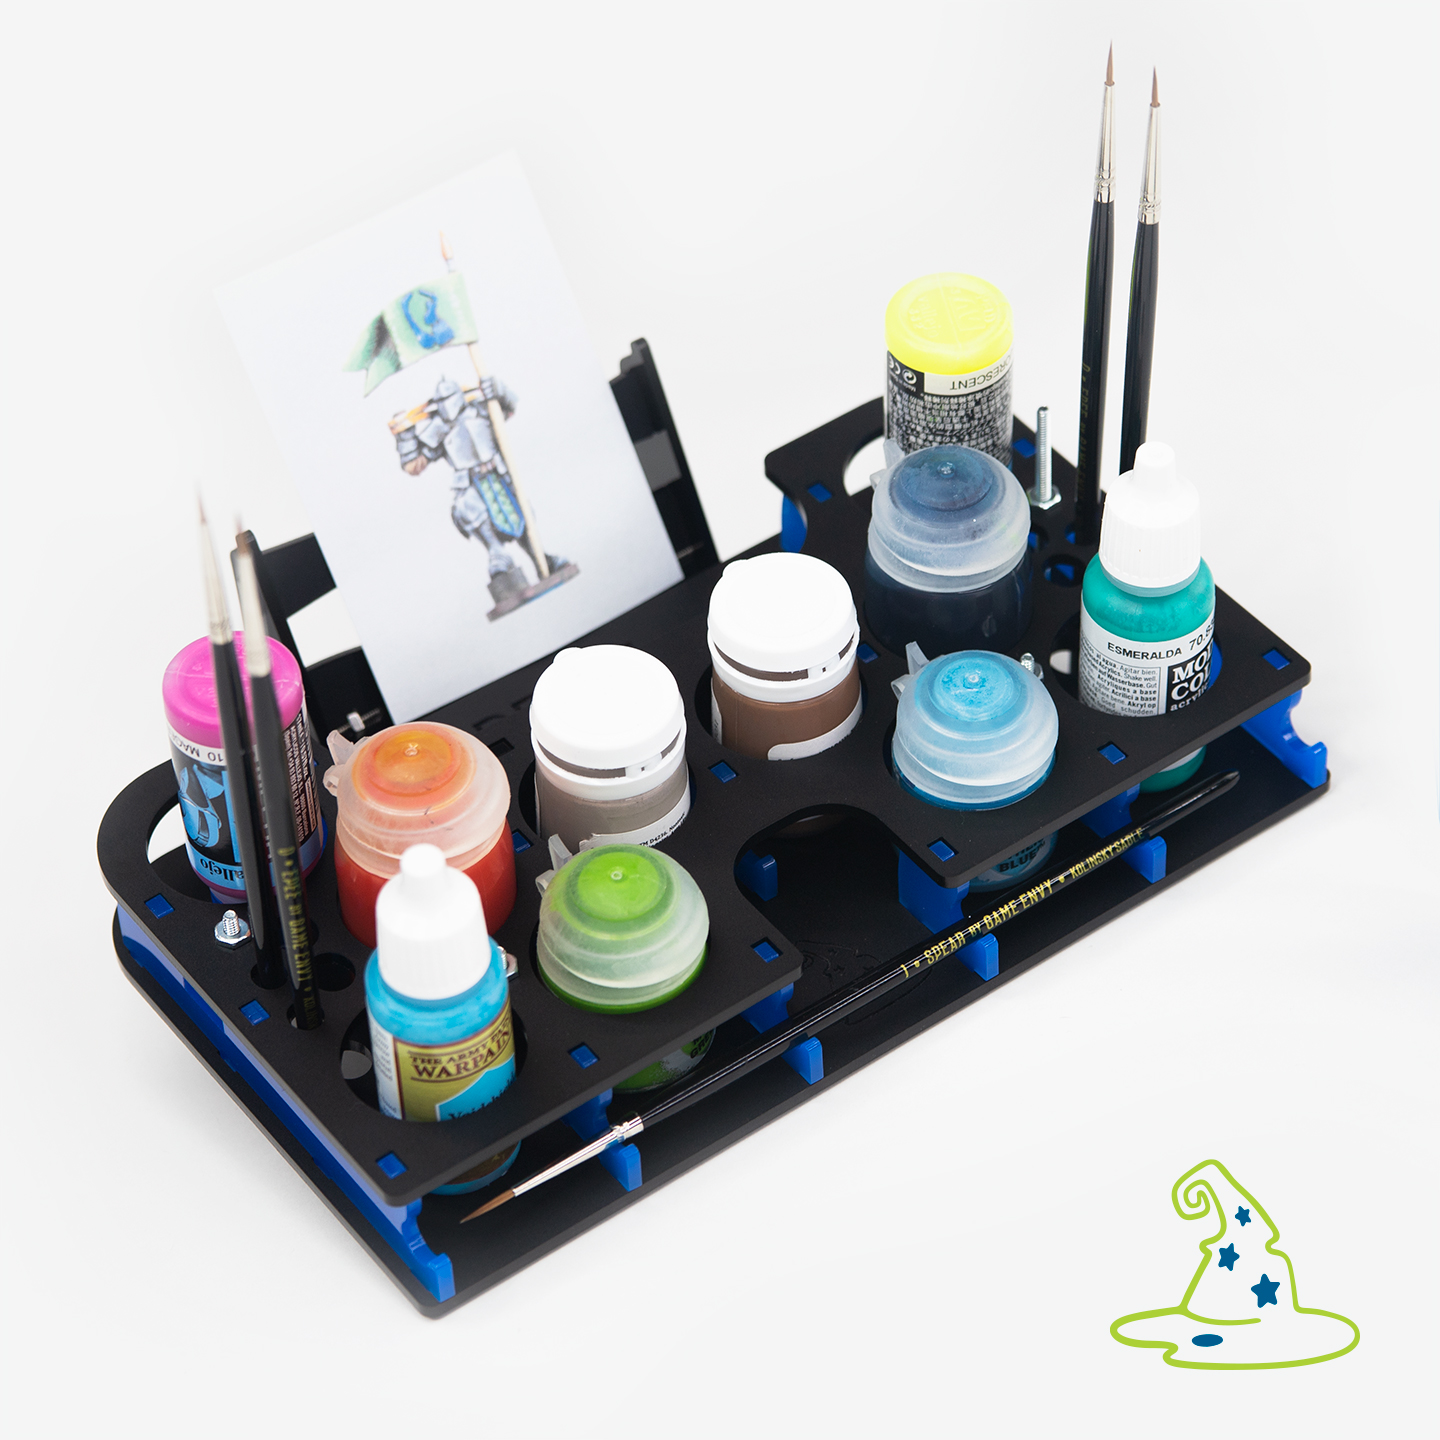 Desk Wizard – Hobby and Miniature Painting Organizers – Game Envy Creations